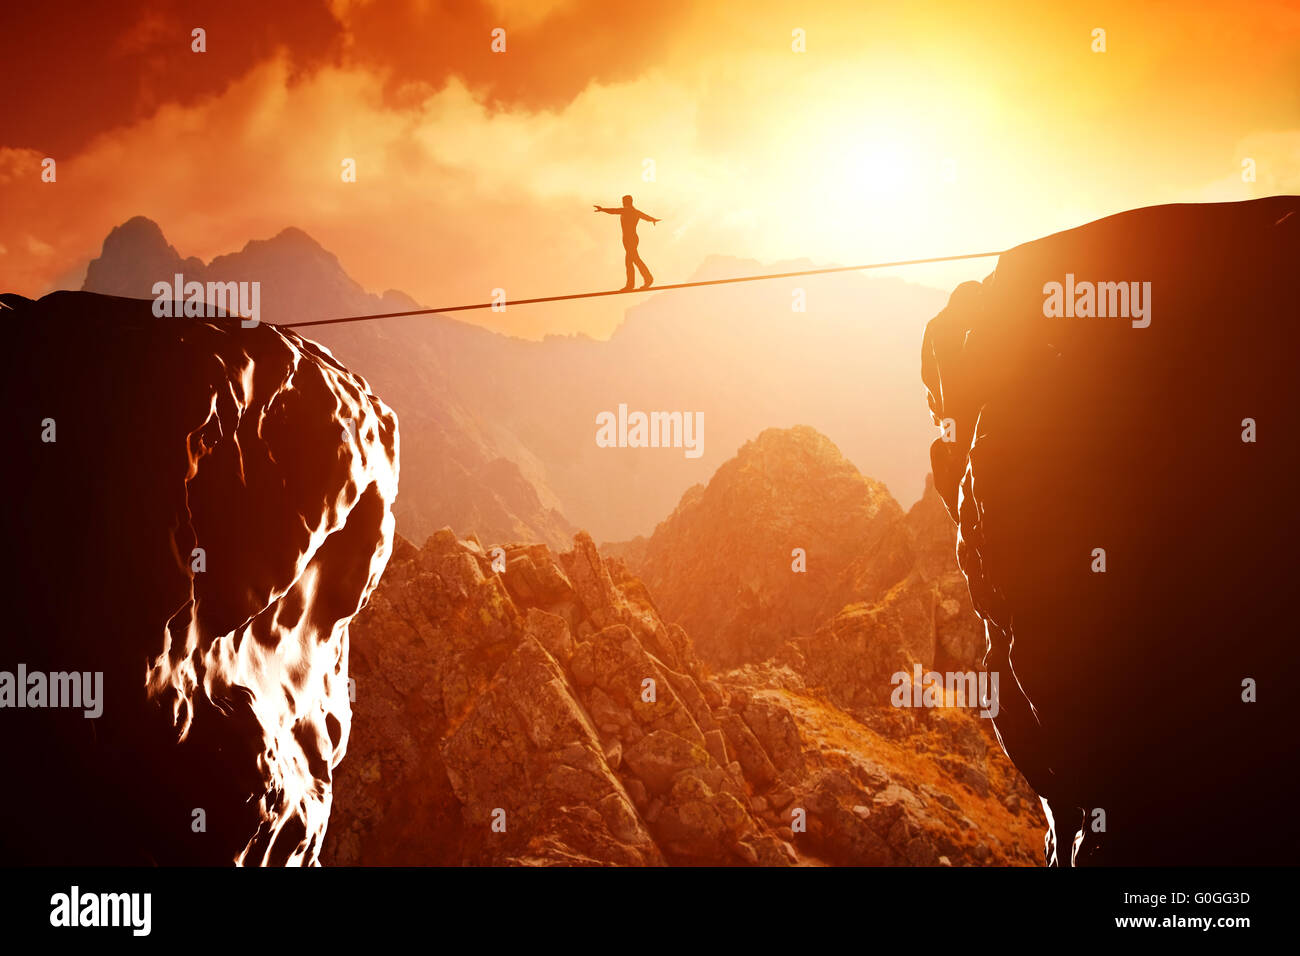 Man walking and balancing on rope over precipice in mountains at sunset. Concept of business Stock Photo